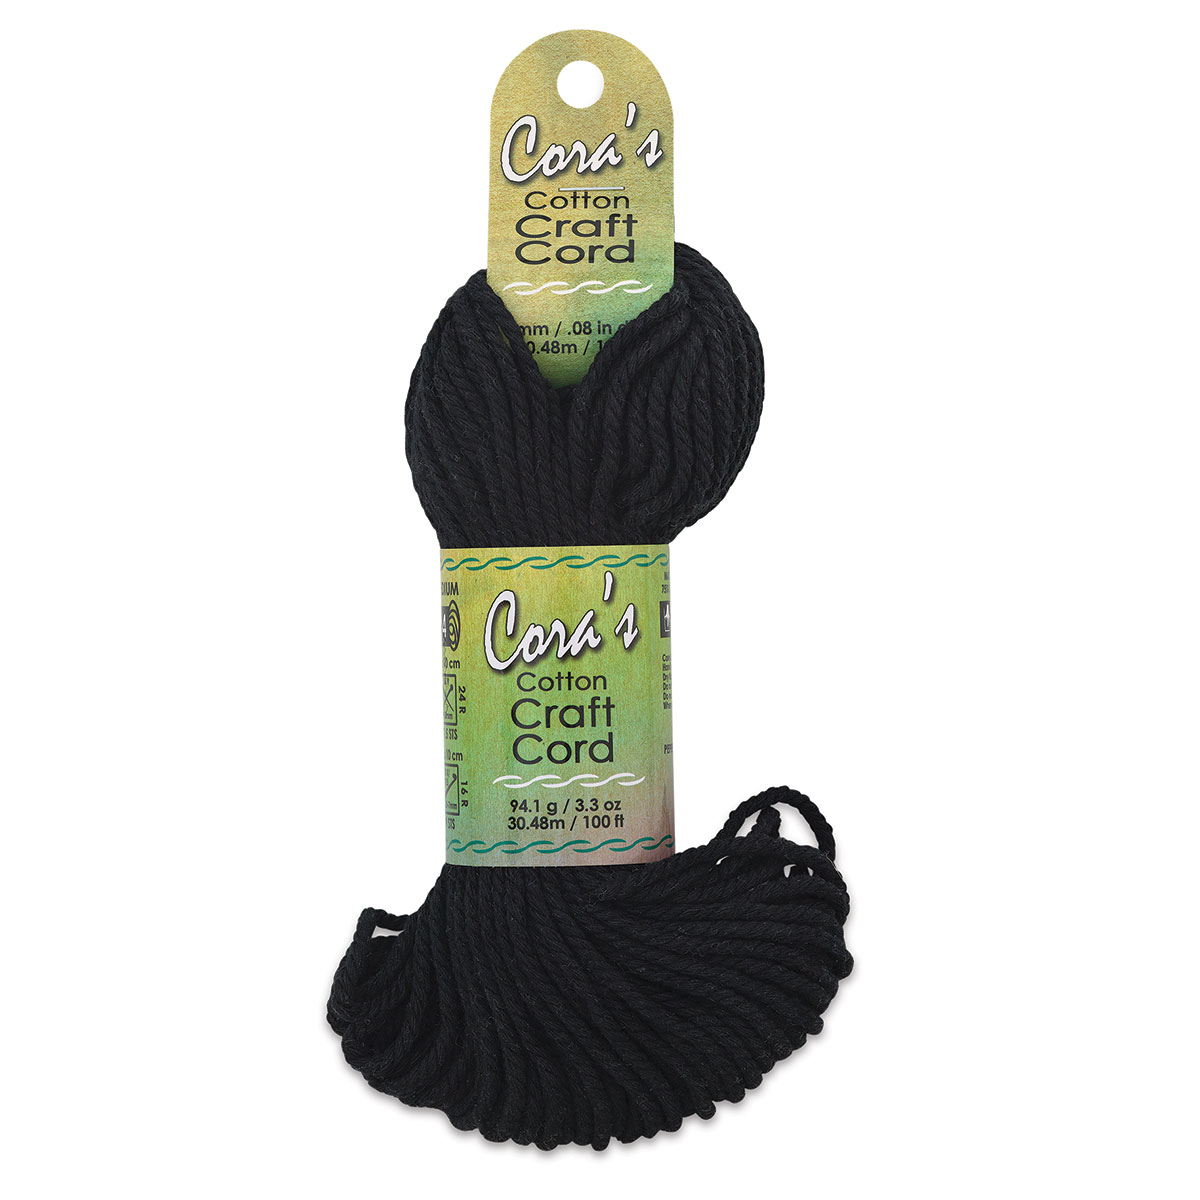 Pepperell Cora's Cotton Craft Cord 4mm x 75' Natural